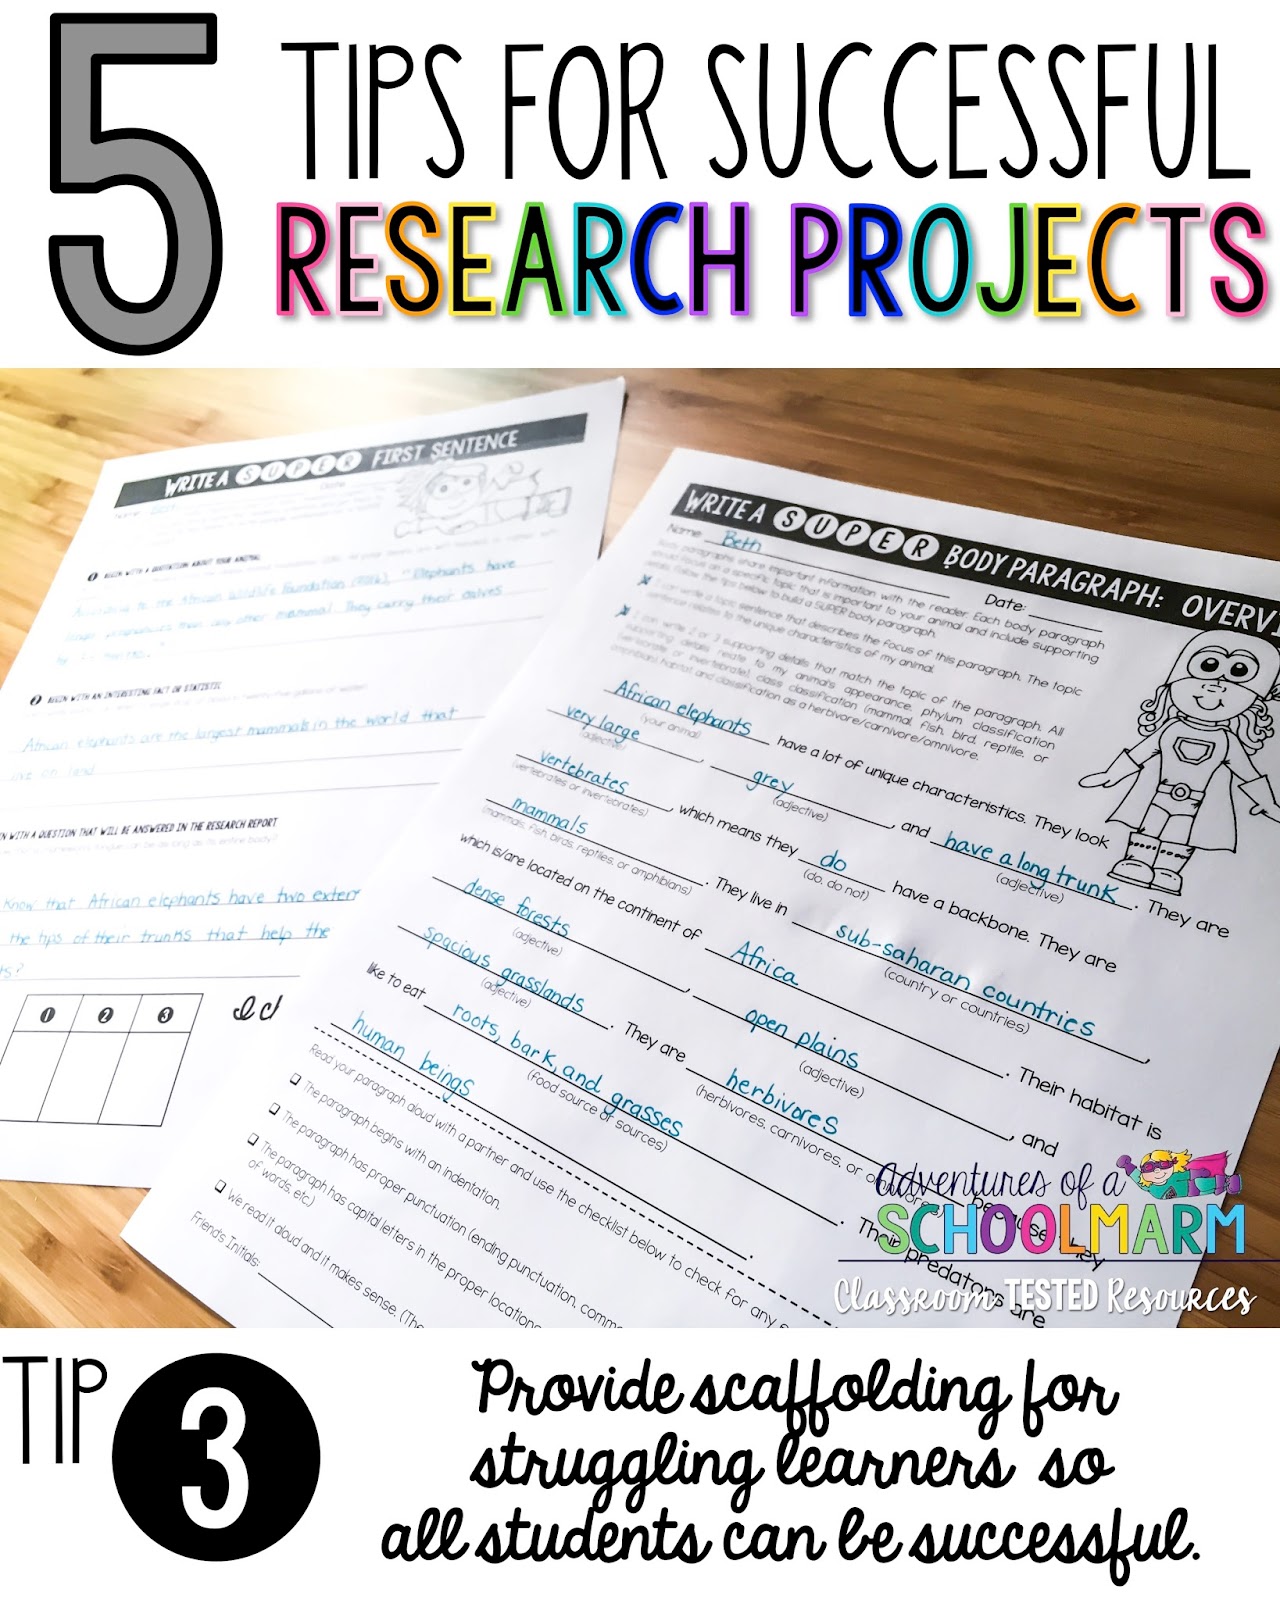 5 Tips for Successful Research Projects | Classroom Tested Resources